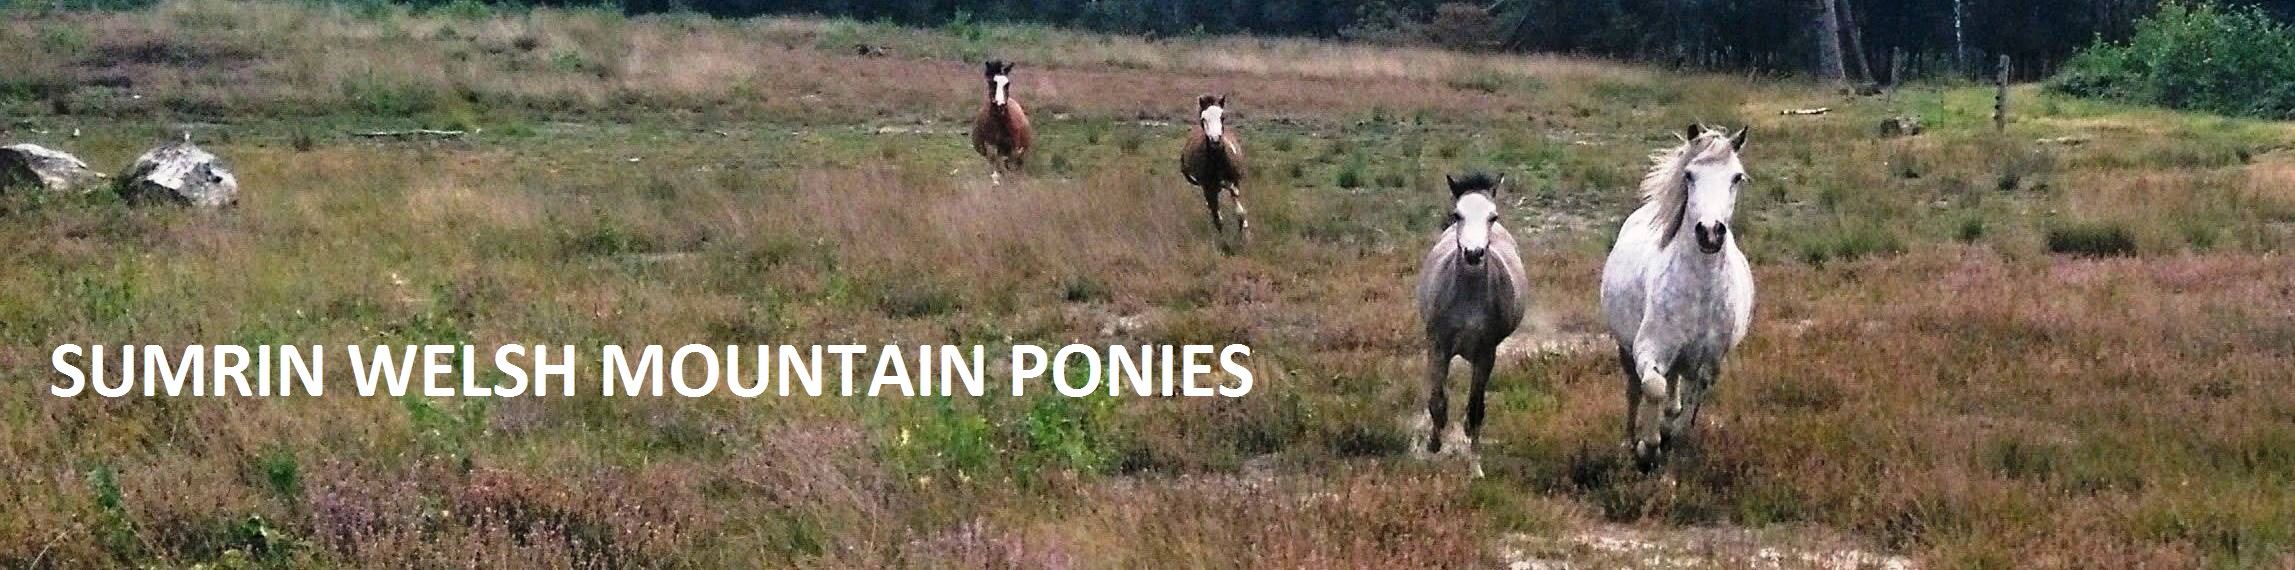 Sumrin Welsh Mountain Ponies